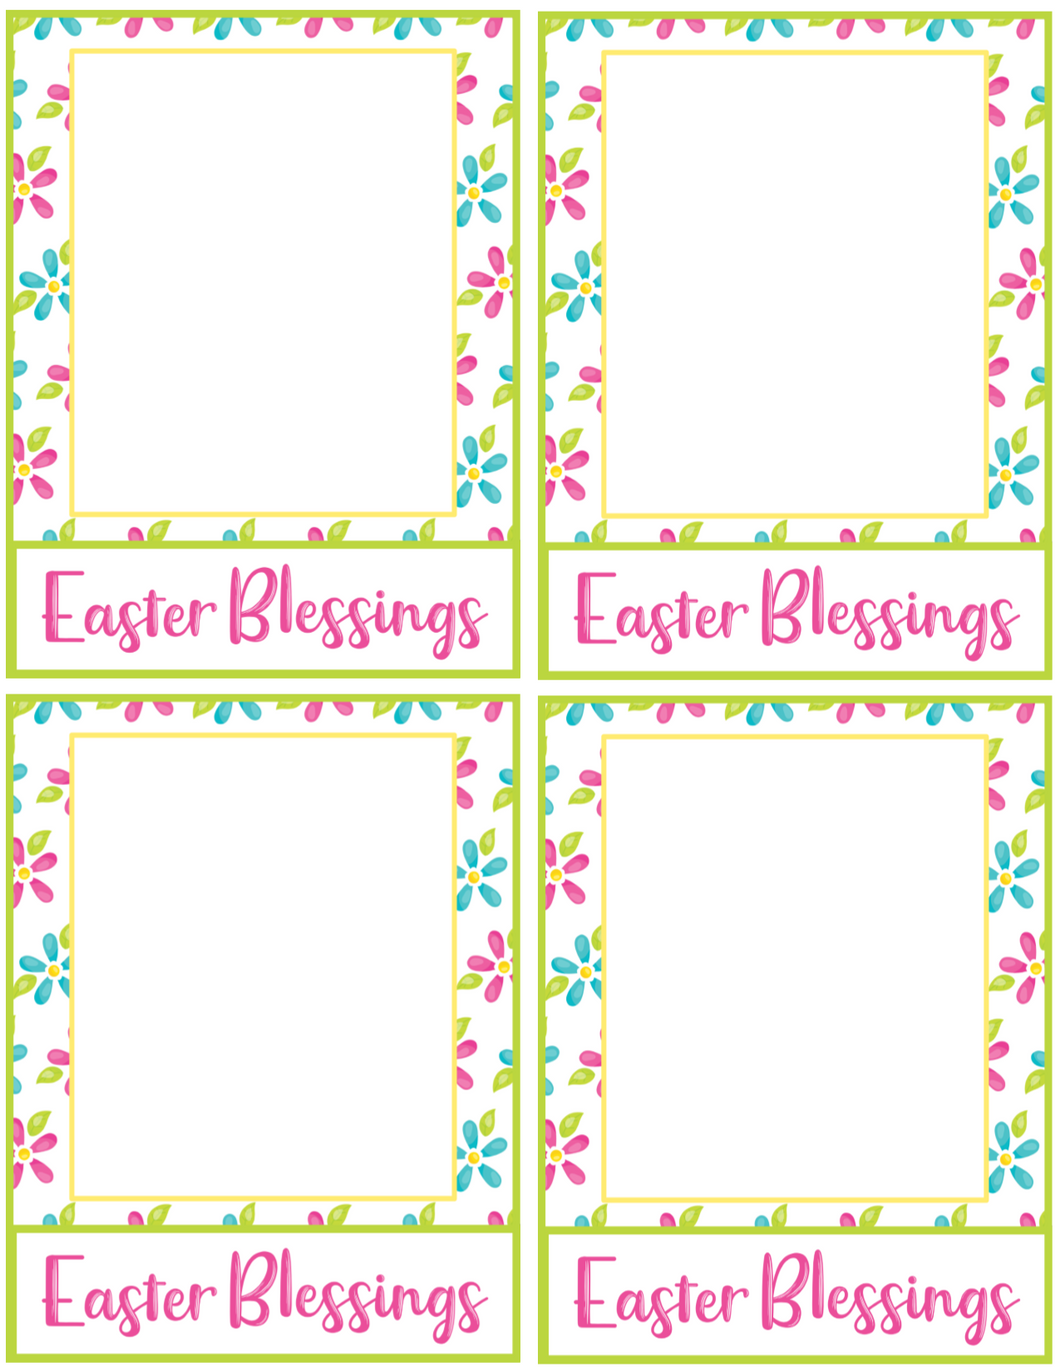 Easter Blessings Card 4x5 - Dots and Bows Designs